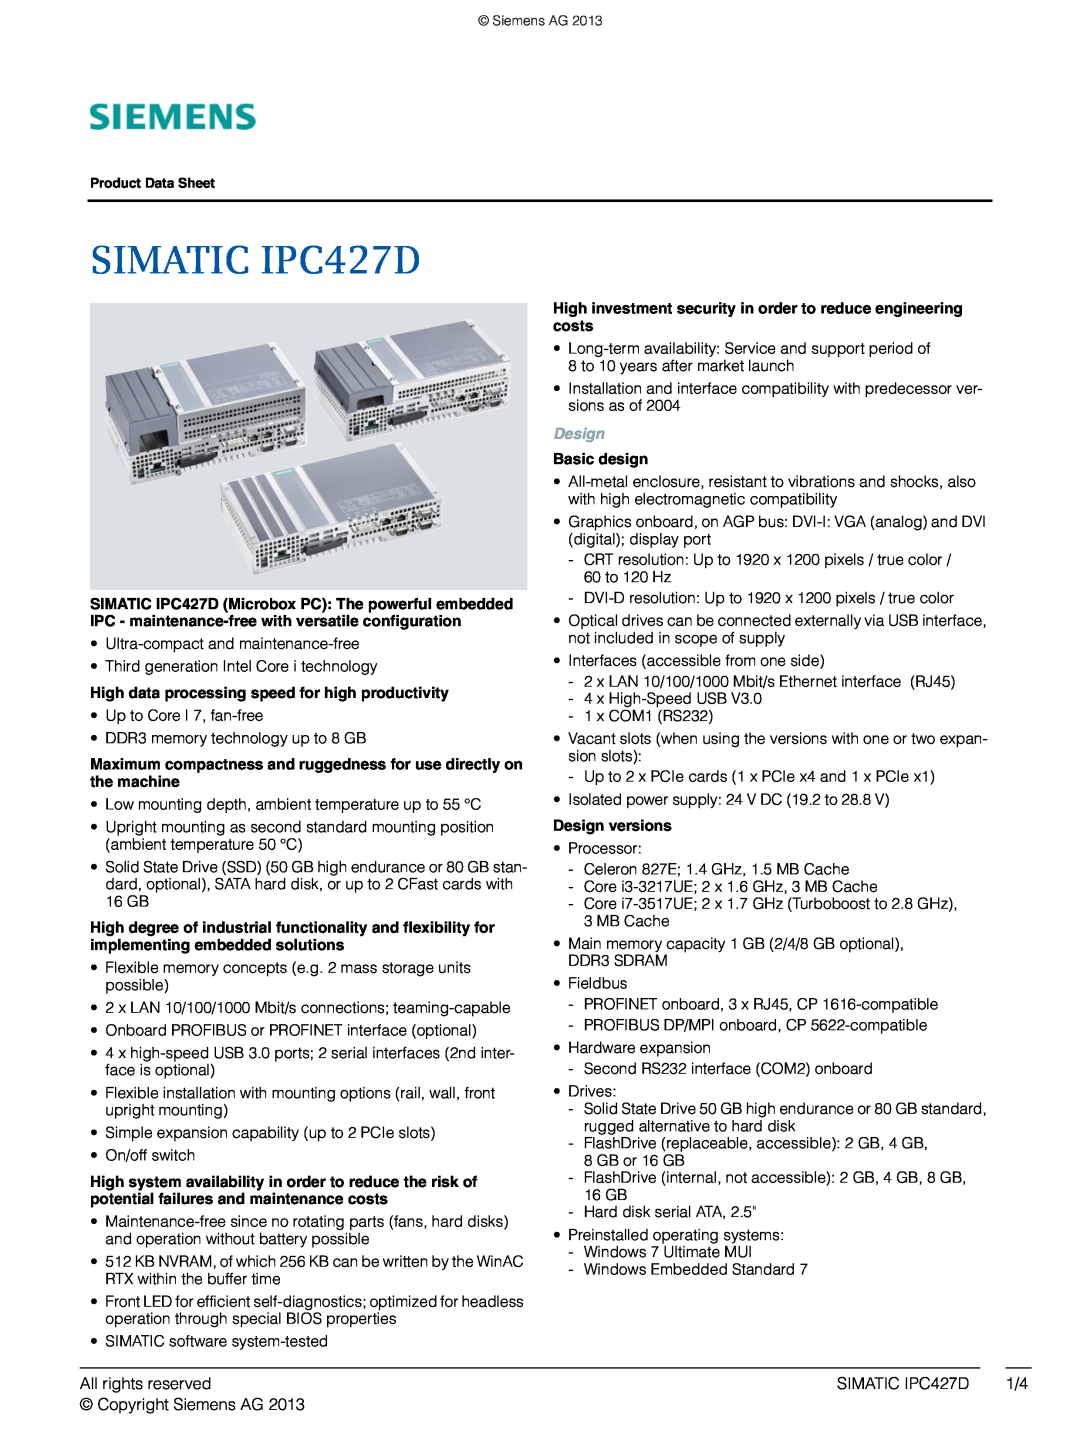 Siemens manual All rights reserved, SIMATIC IPC427D, Copyright Siemens AG, Basic design, Design versions 